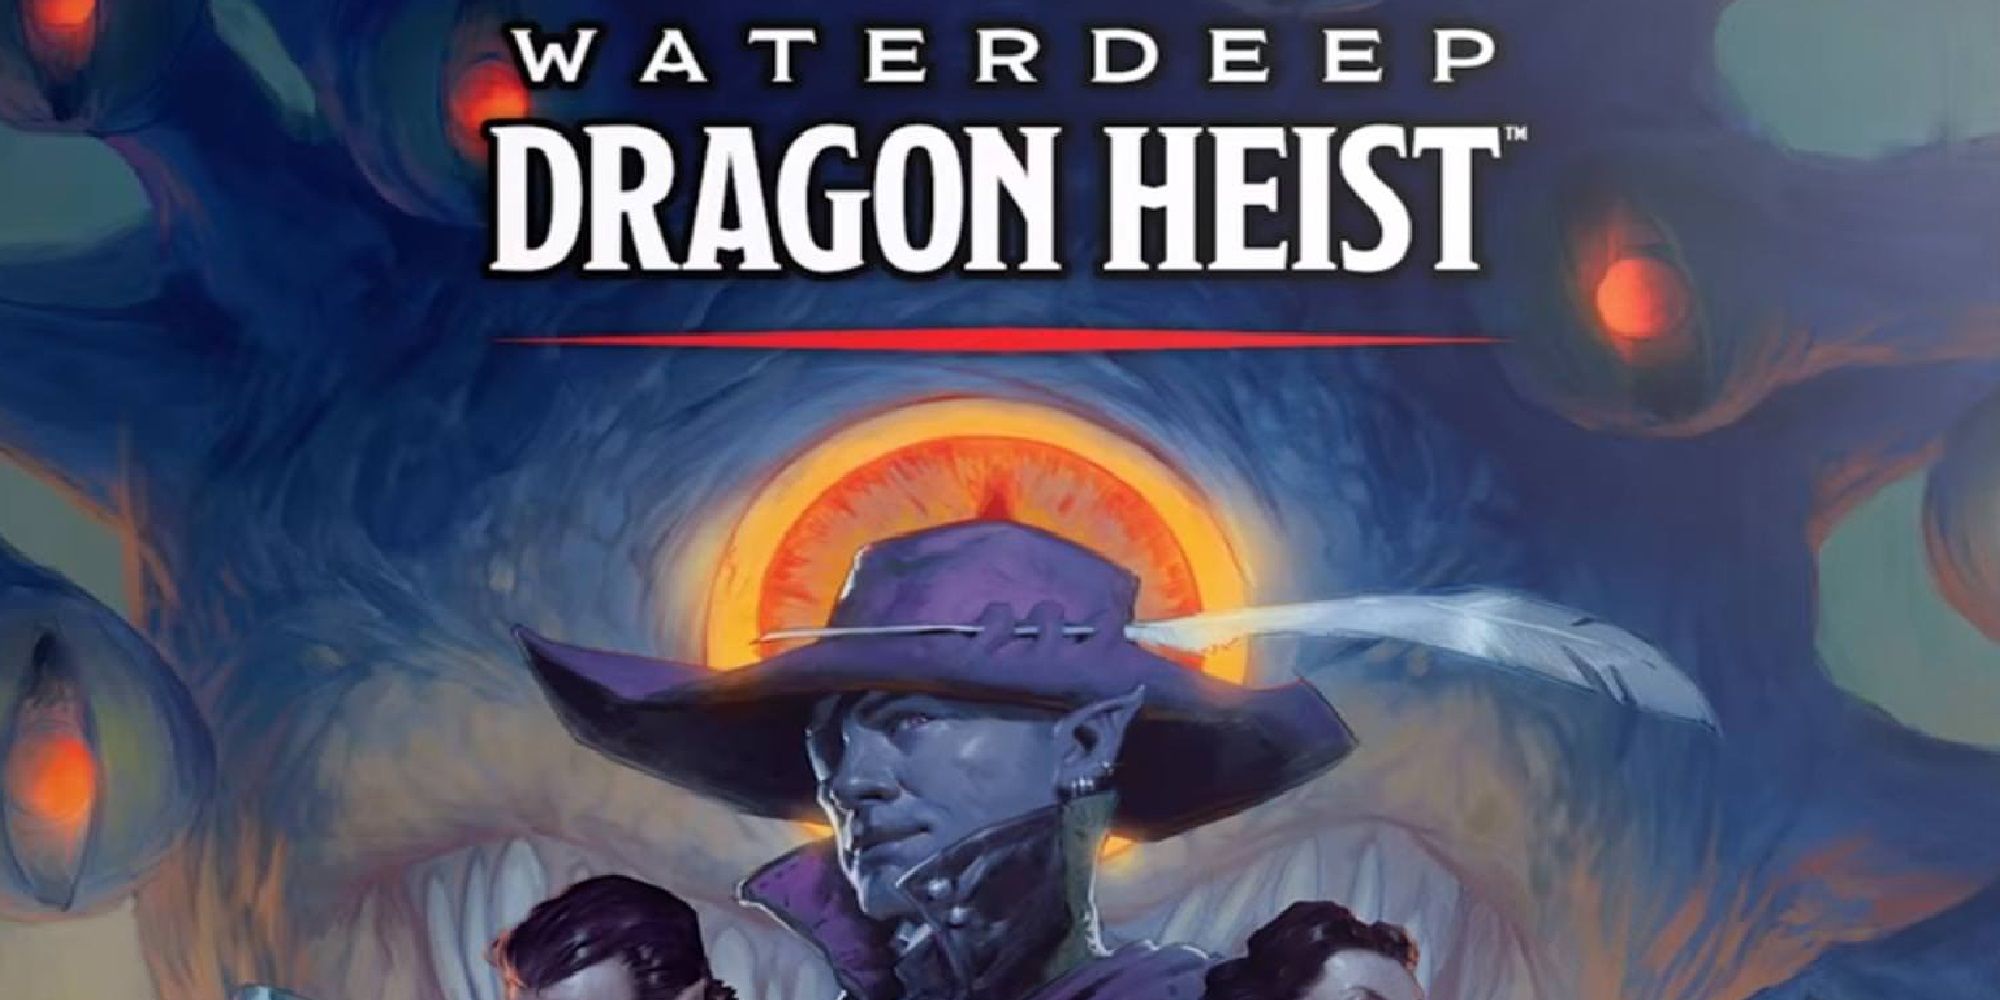 The cover of the Waterdeep: Dragon Heist campaign module for D&D